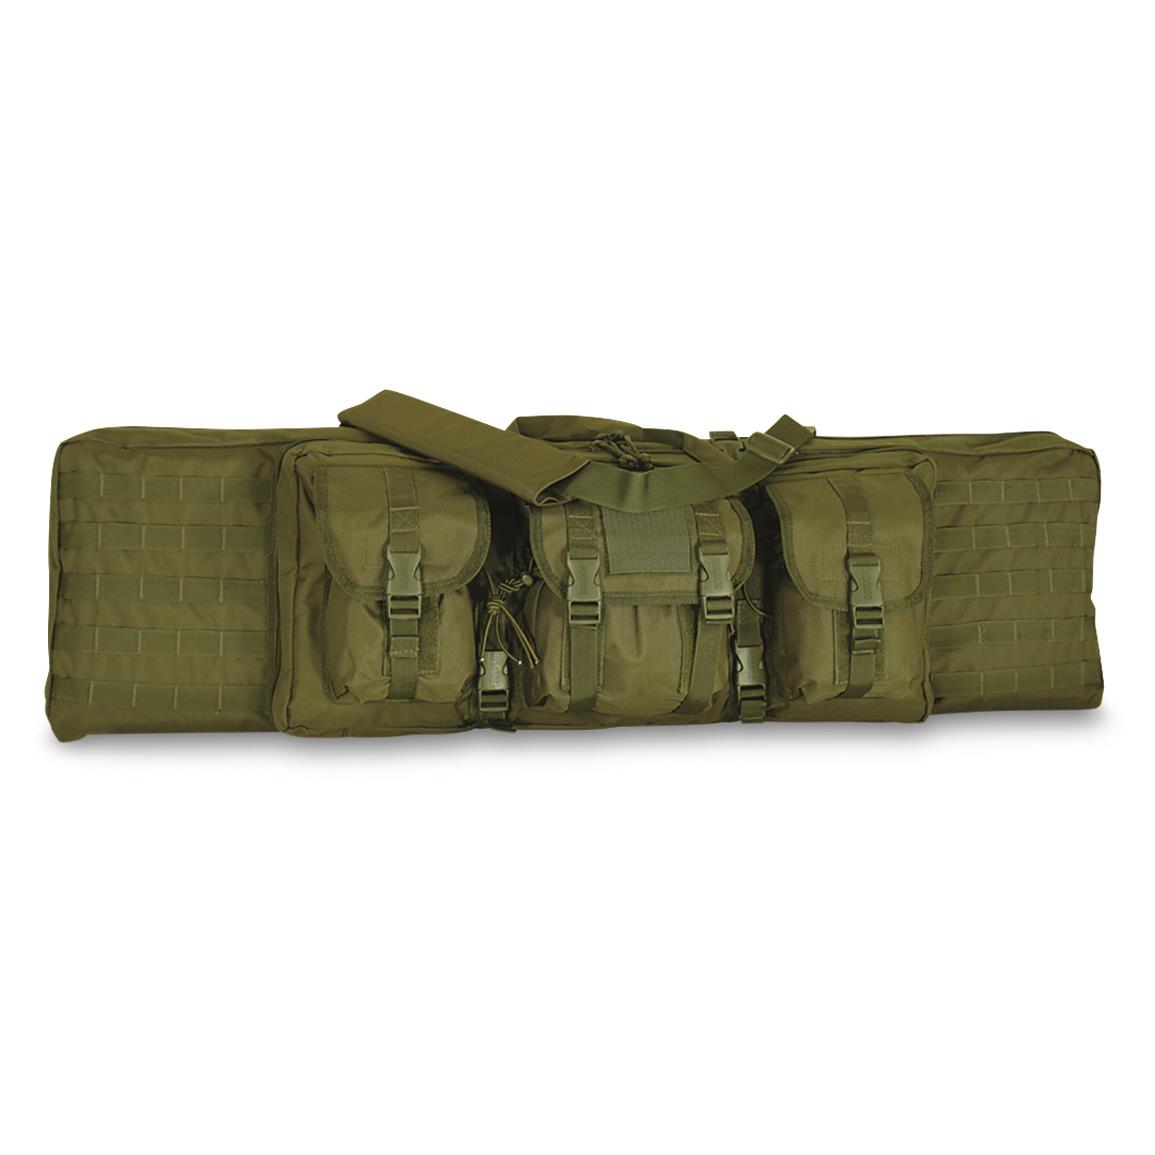 Voodoo Tactical 42" Padded Weapon Case, Olive Drab